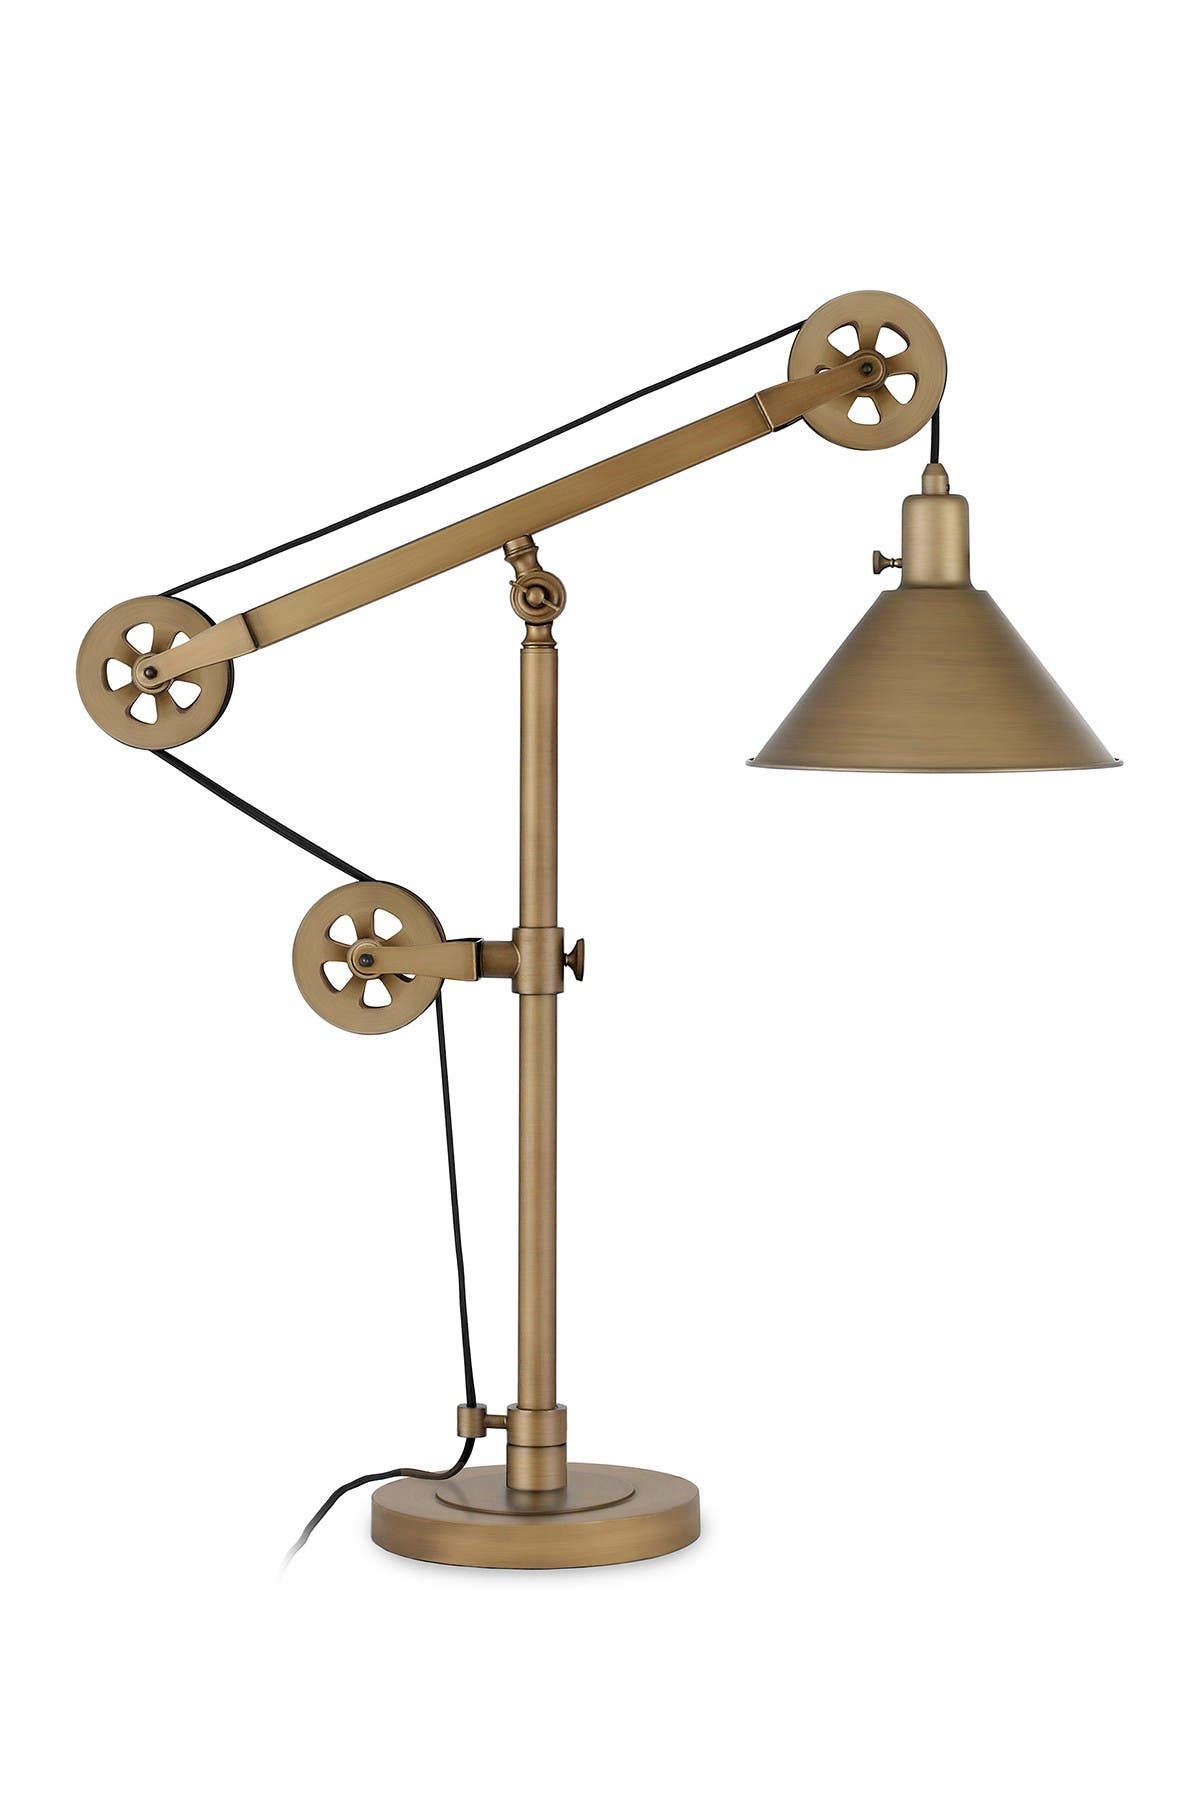 Addison And Lane Descartes Table Lamp In Medium Brown1